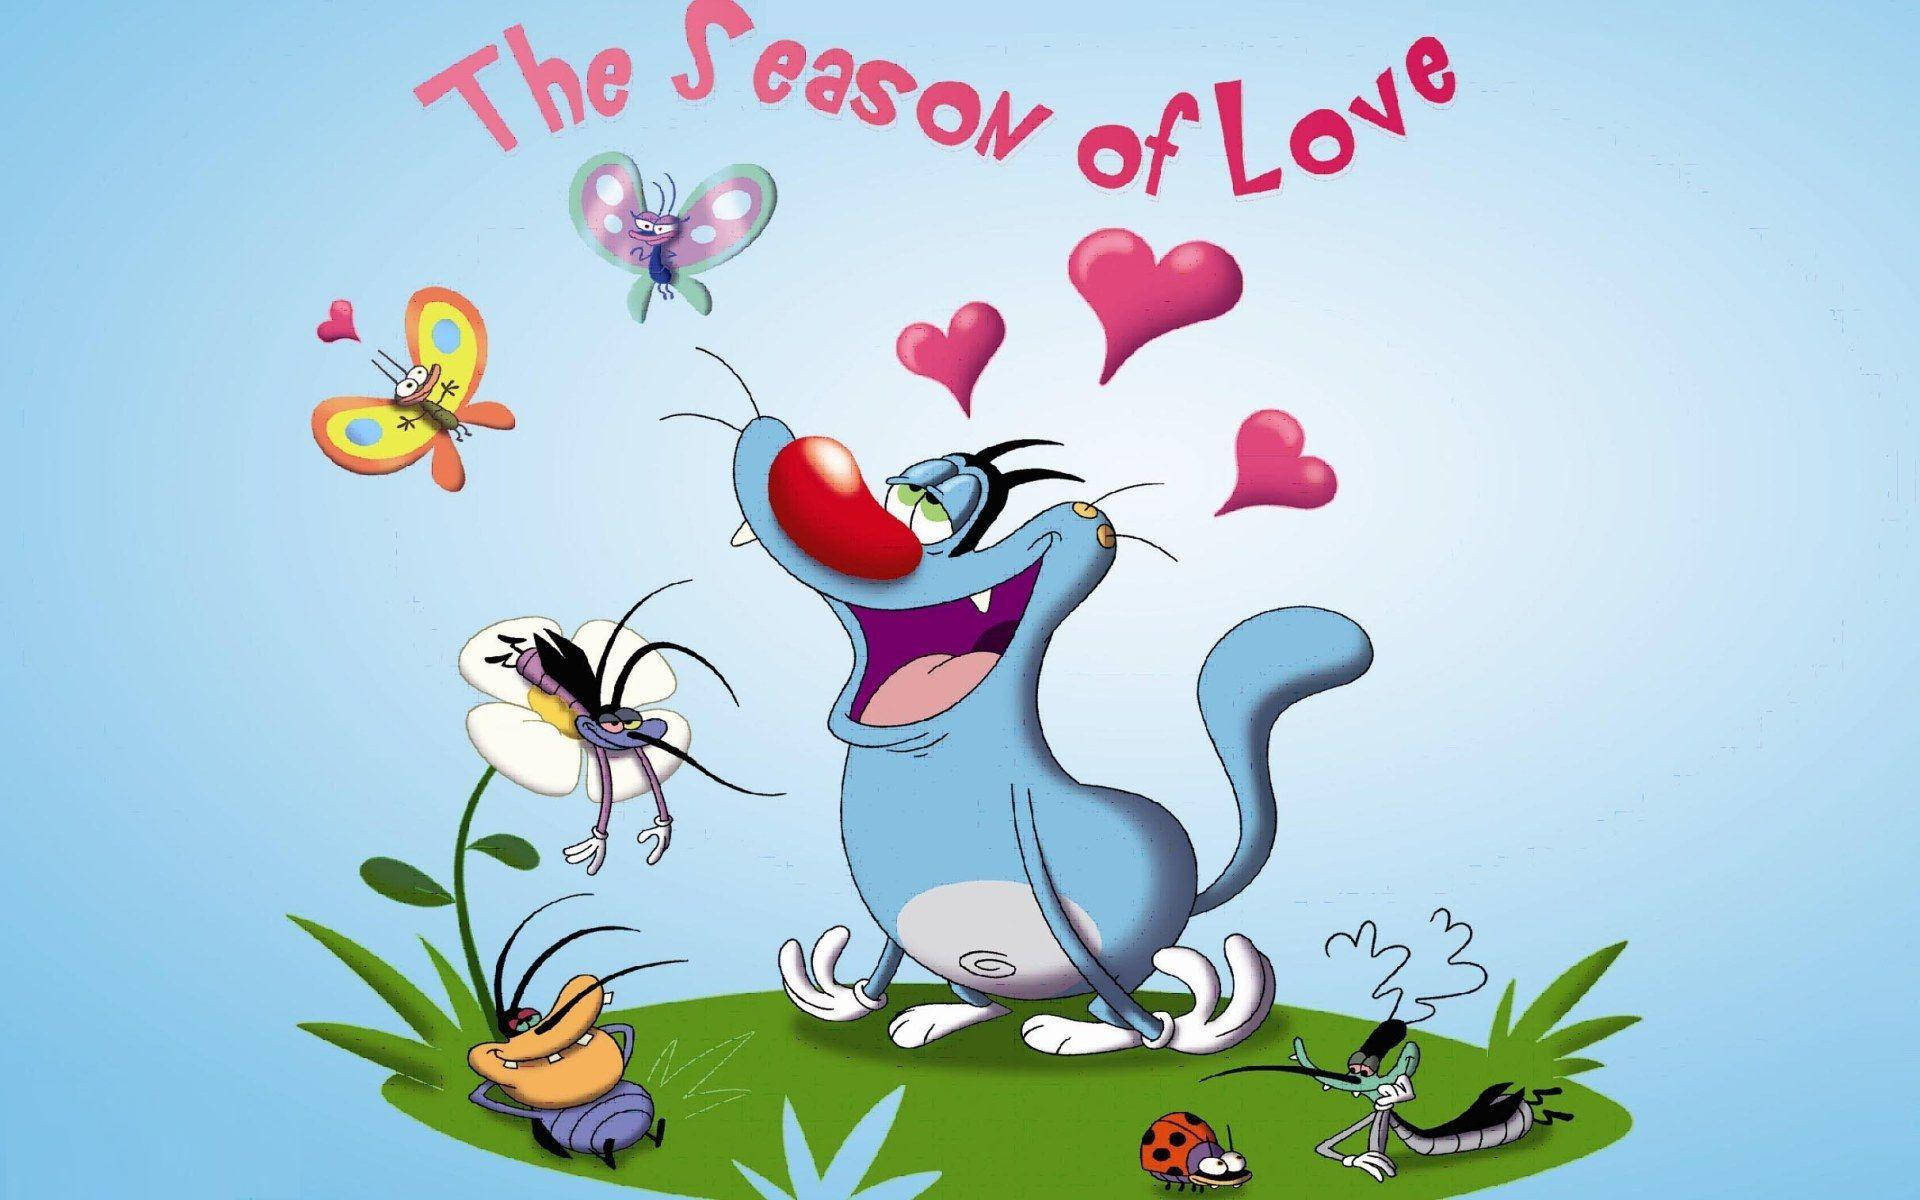 Oggy And The Cockroaches Season Of Love Wallpaper